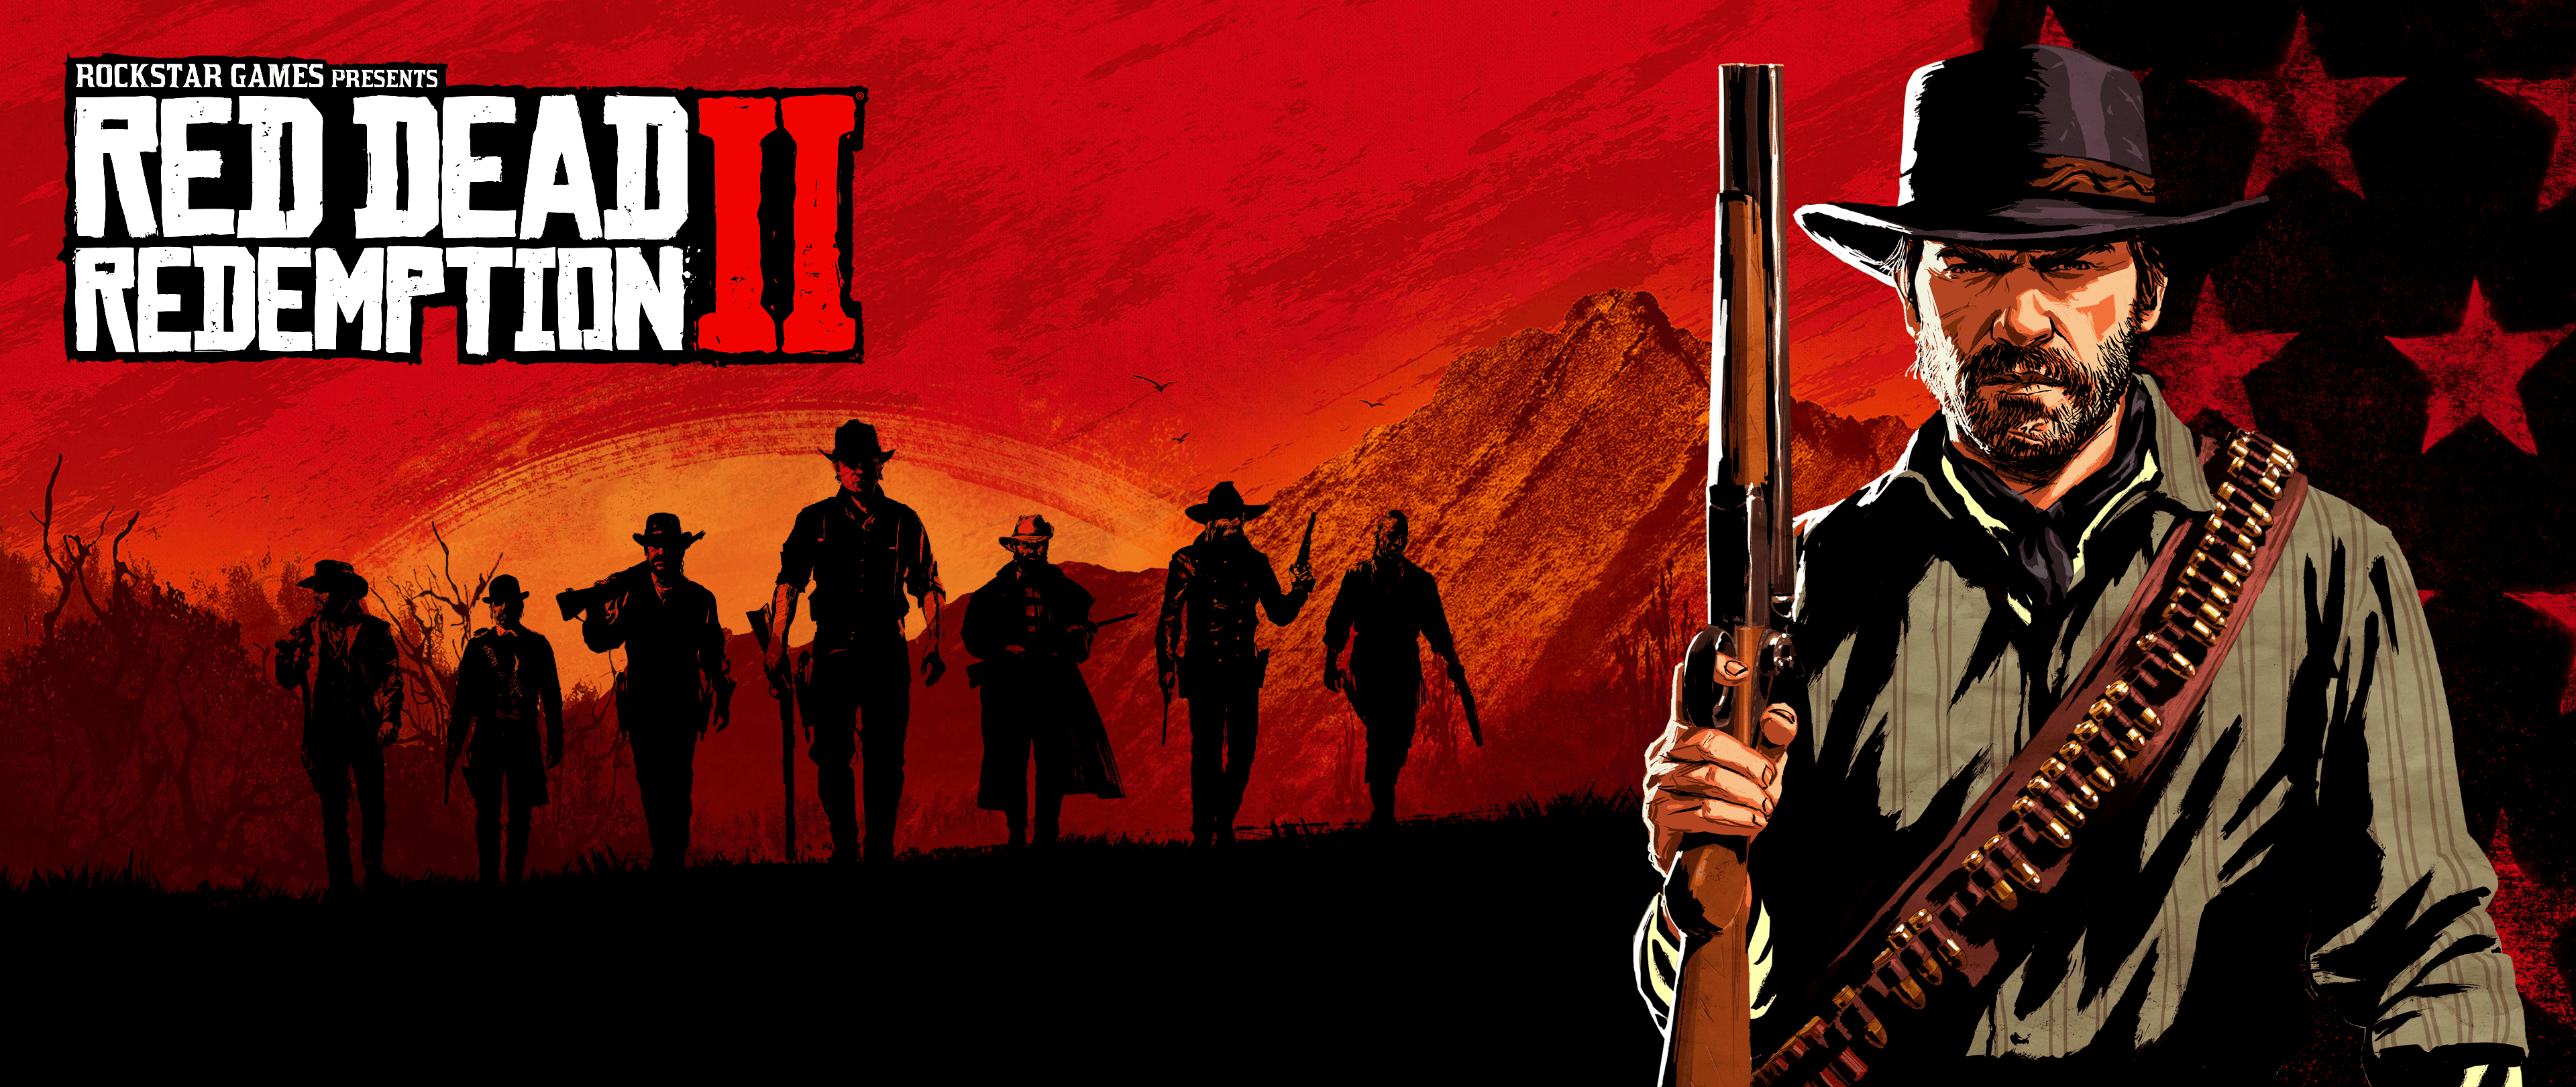 I made a RDR2 wallpapers in anticipation of the game : reddeadredemption.